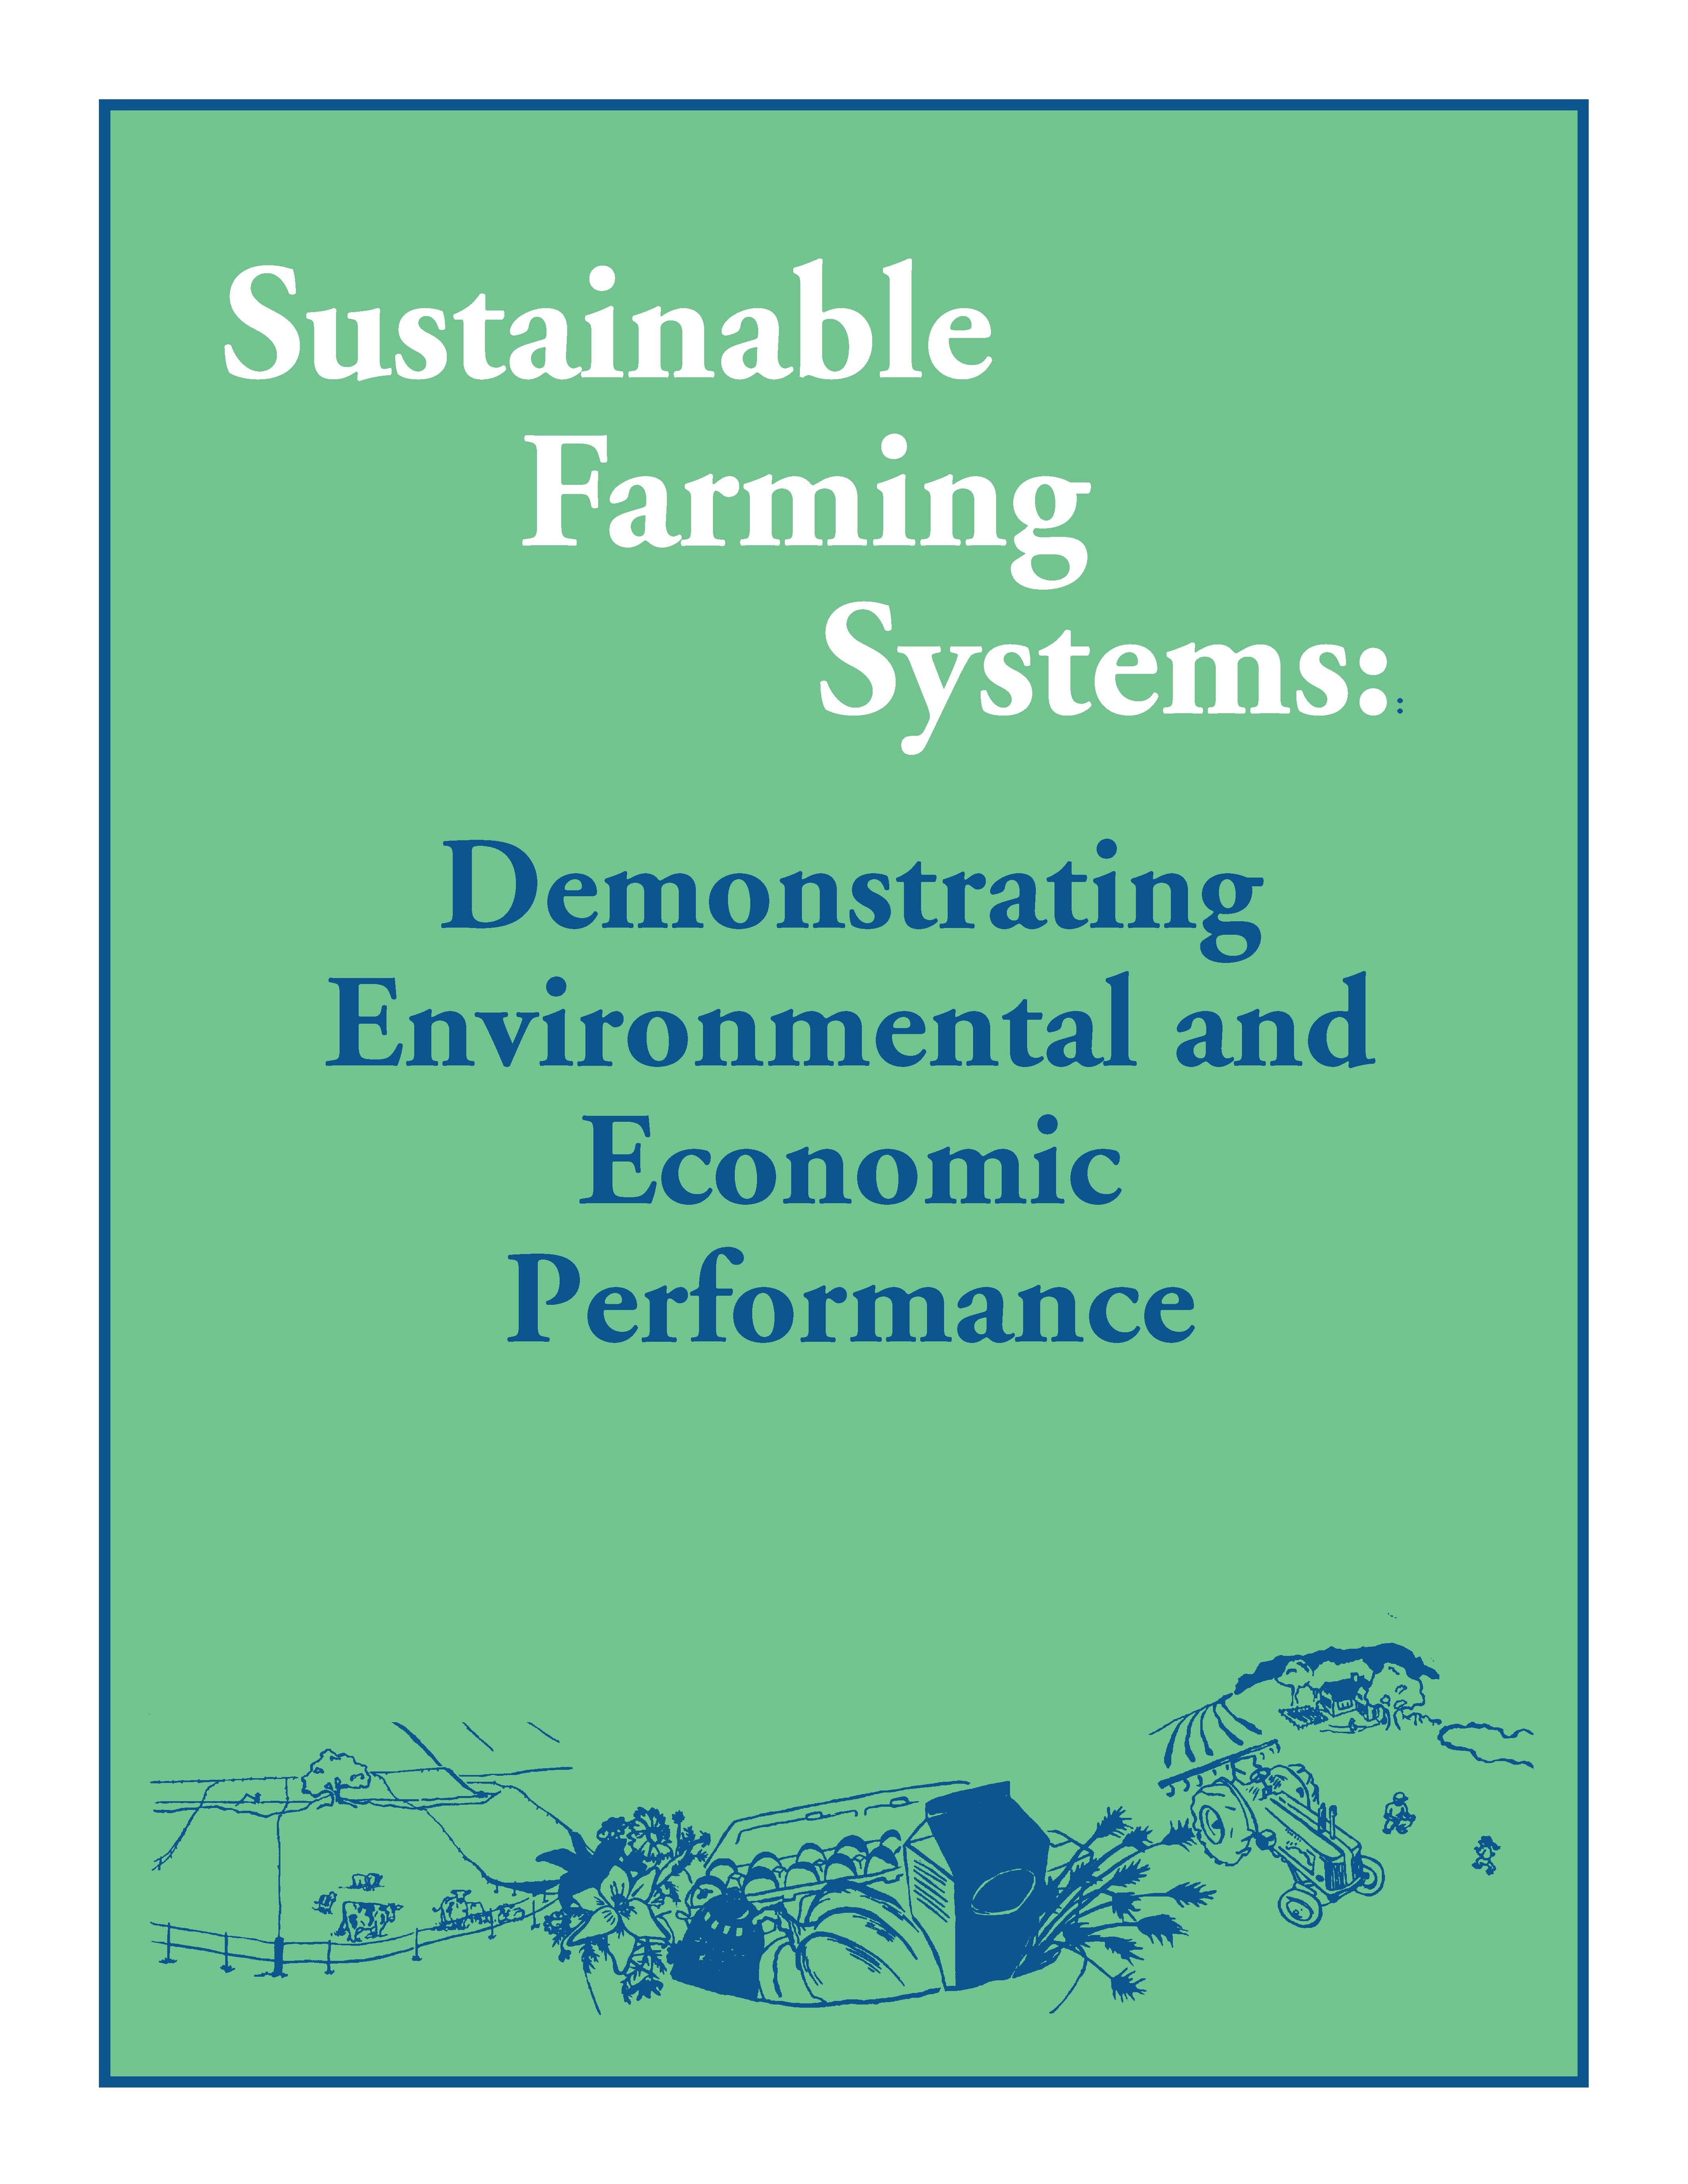 cover image for Sustainable Farming Systems report